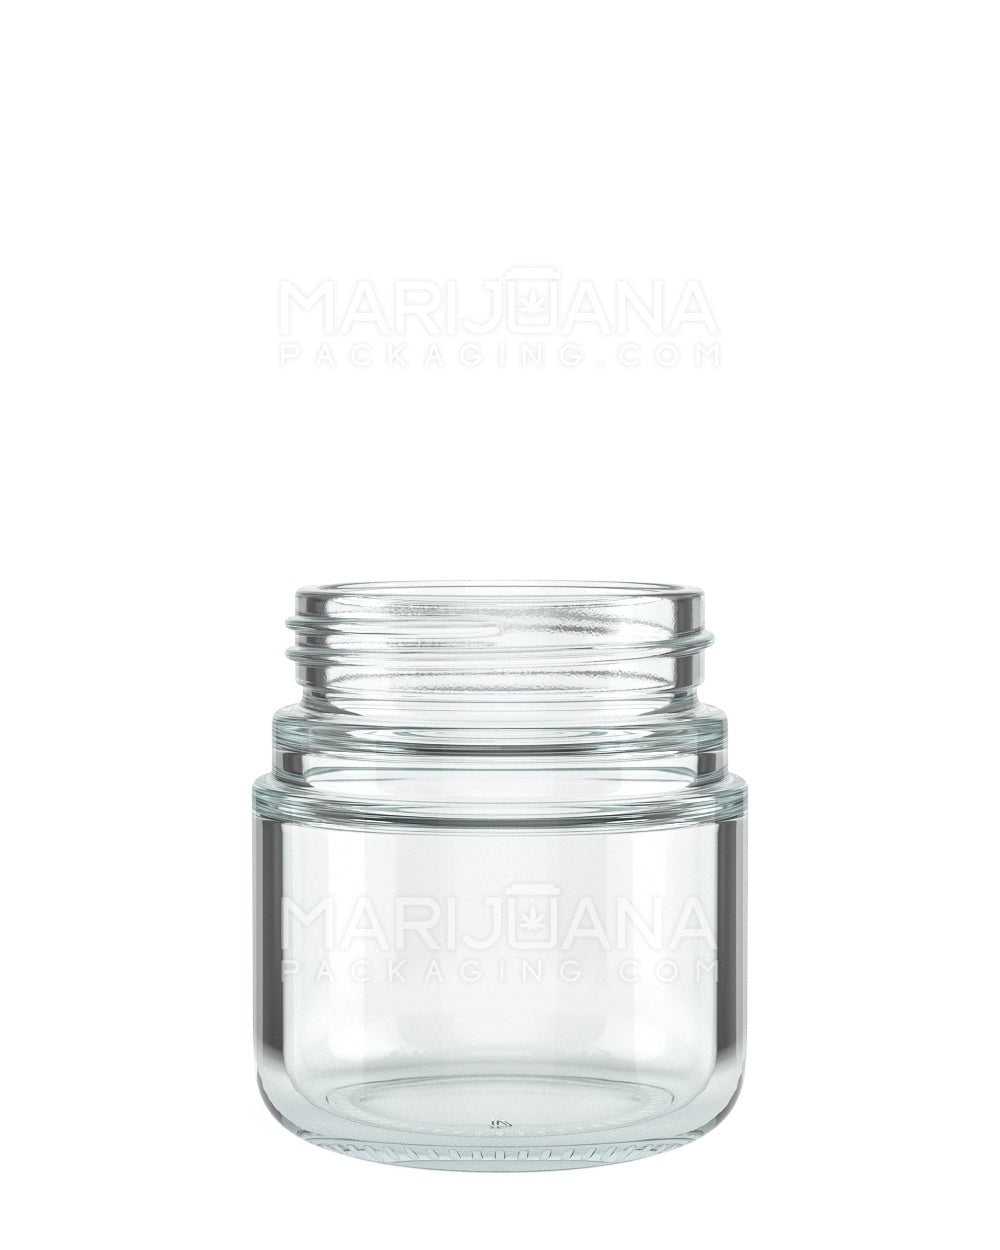 Child Resistant | Rounded Base Clear Glass Jars w/ Smooth Black Dome Cap | 55mm - 2oz - 200 Count - 2